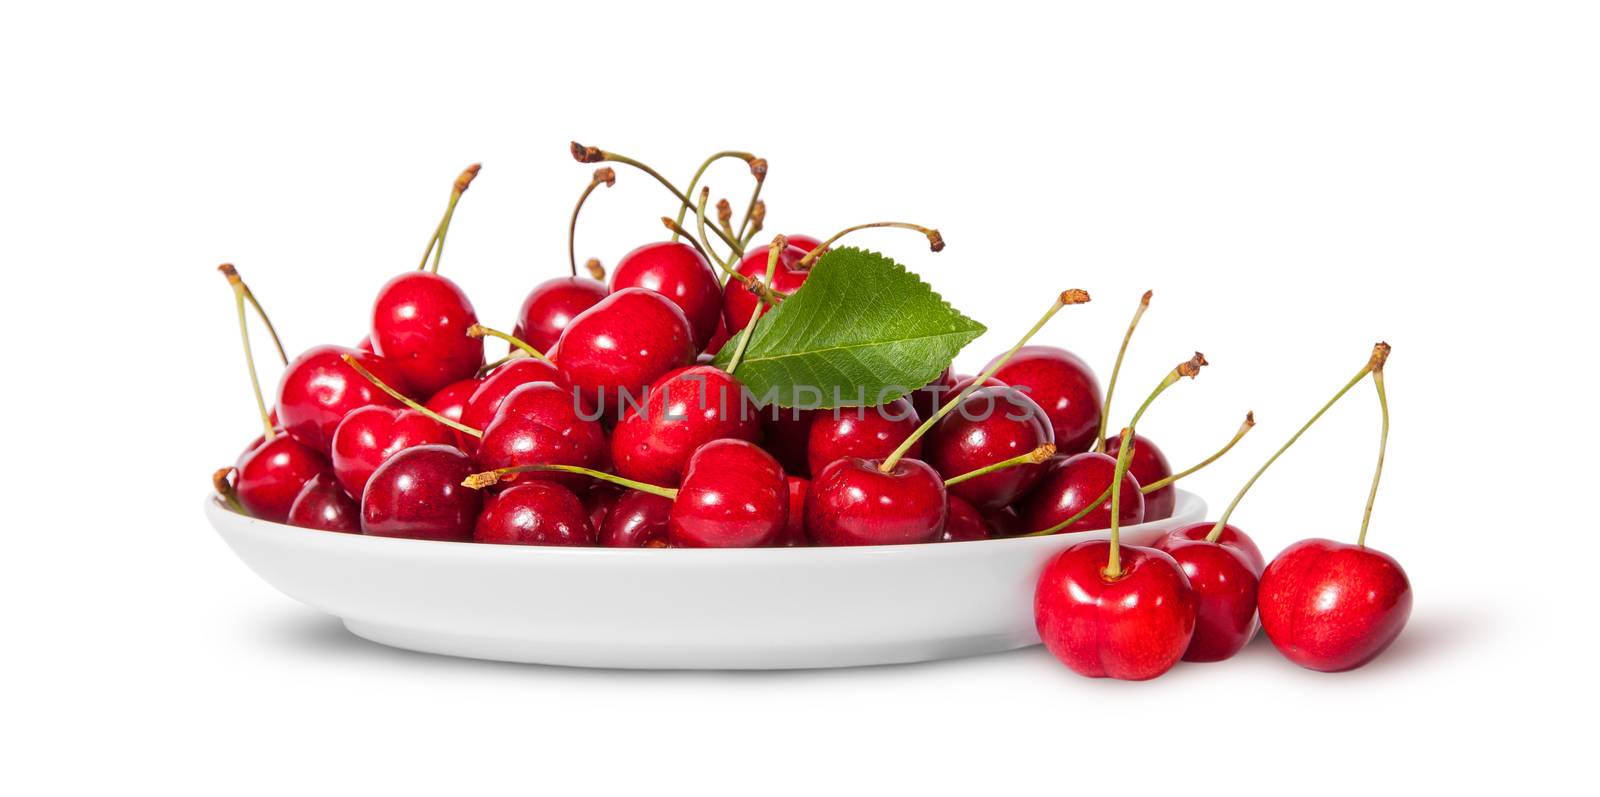 Sweet cherries with leaf on white plate and three near isolated on white background